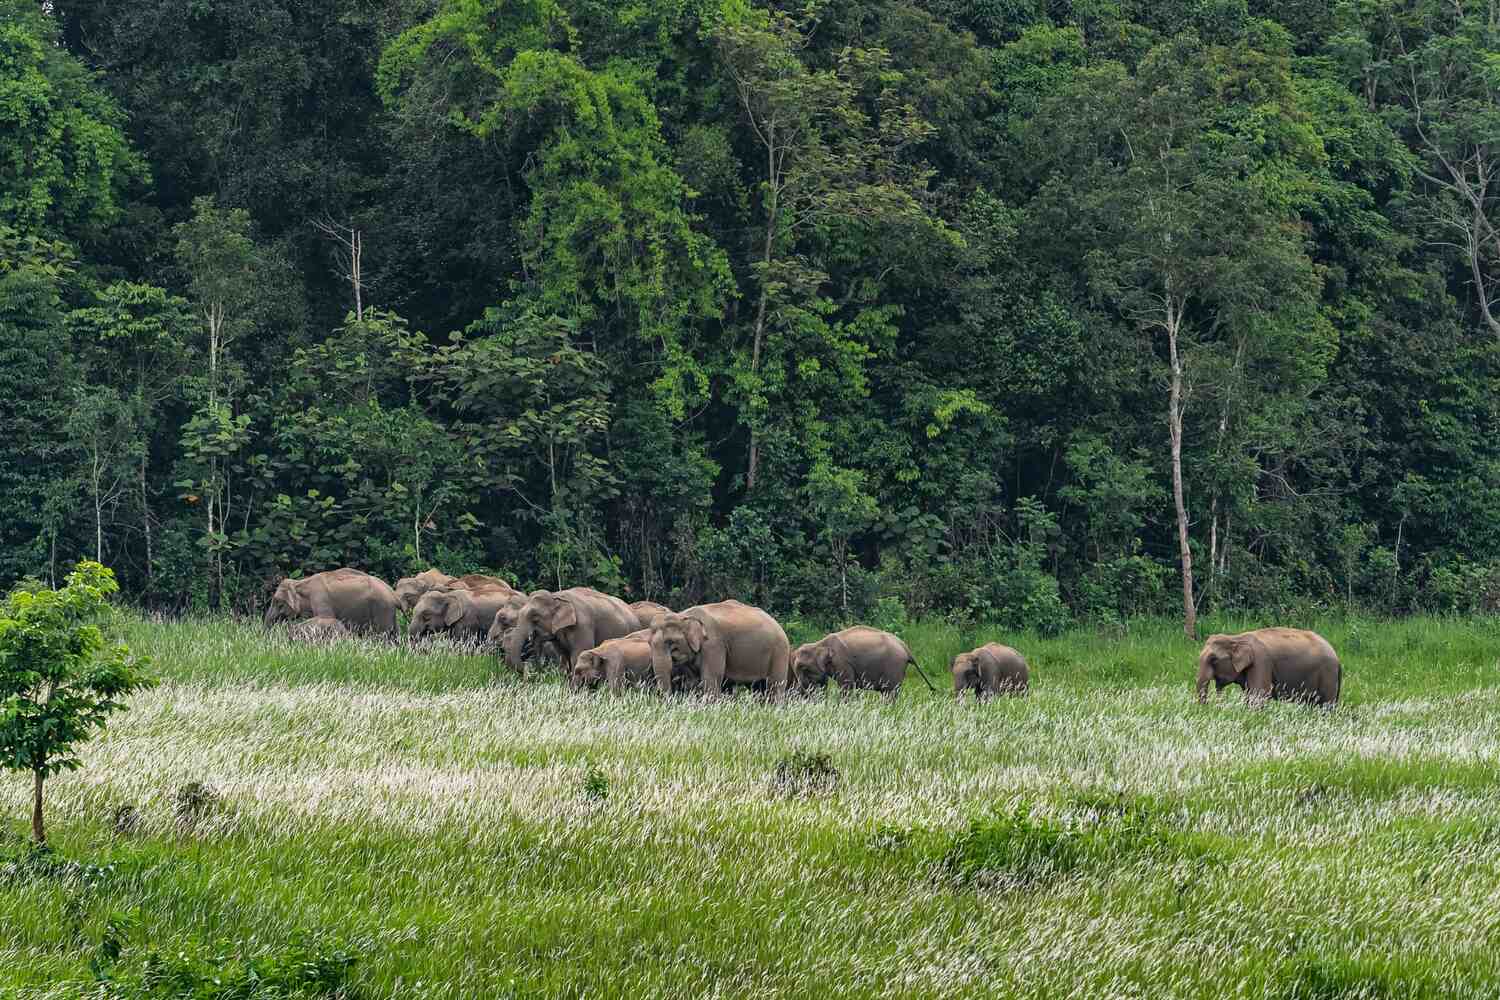 A herd of elephants grazing peacefully in a green field with dense forest surrounding them.